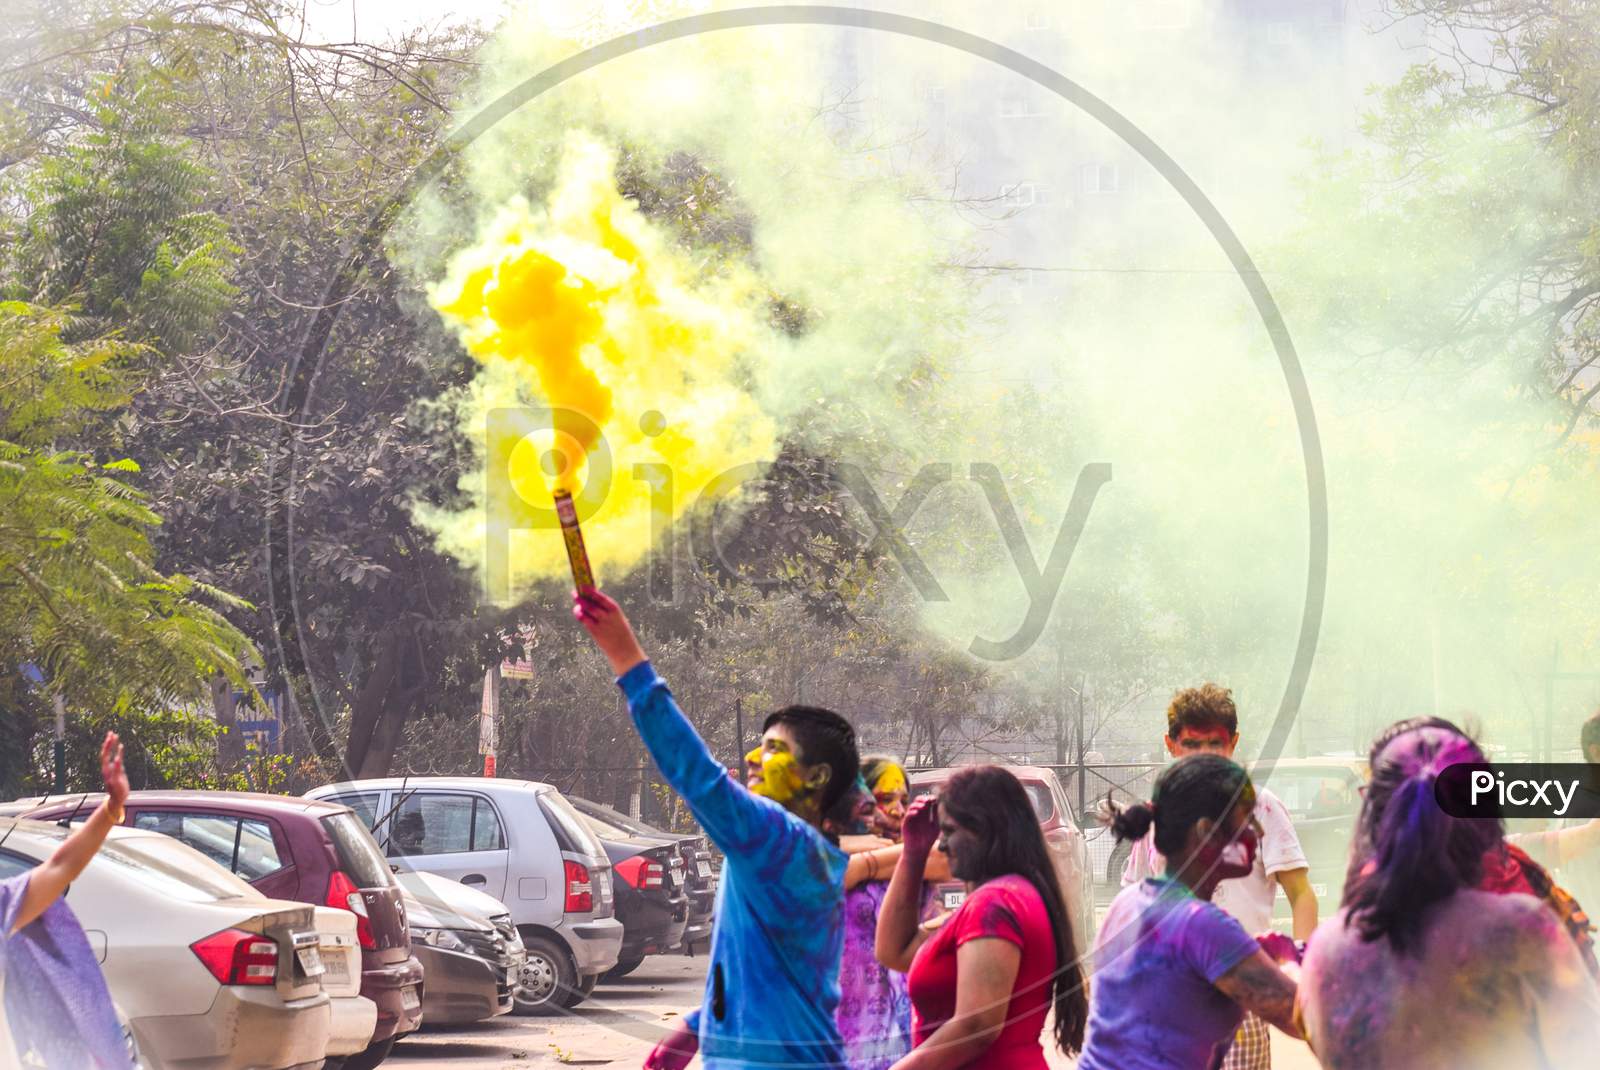 New Delhi, Delhi / India - March 04, 2019: Children playing with colorful smoke and celebrating the festival of holi in India.